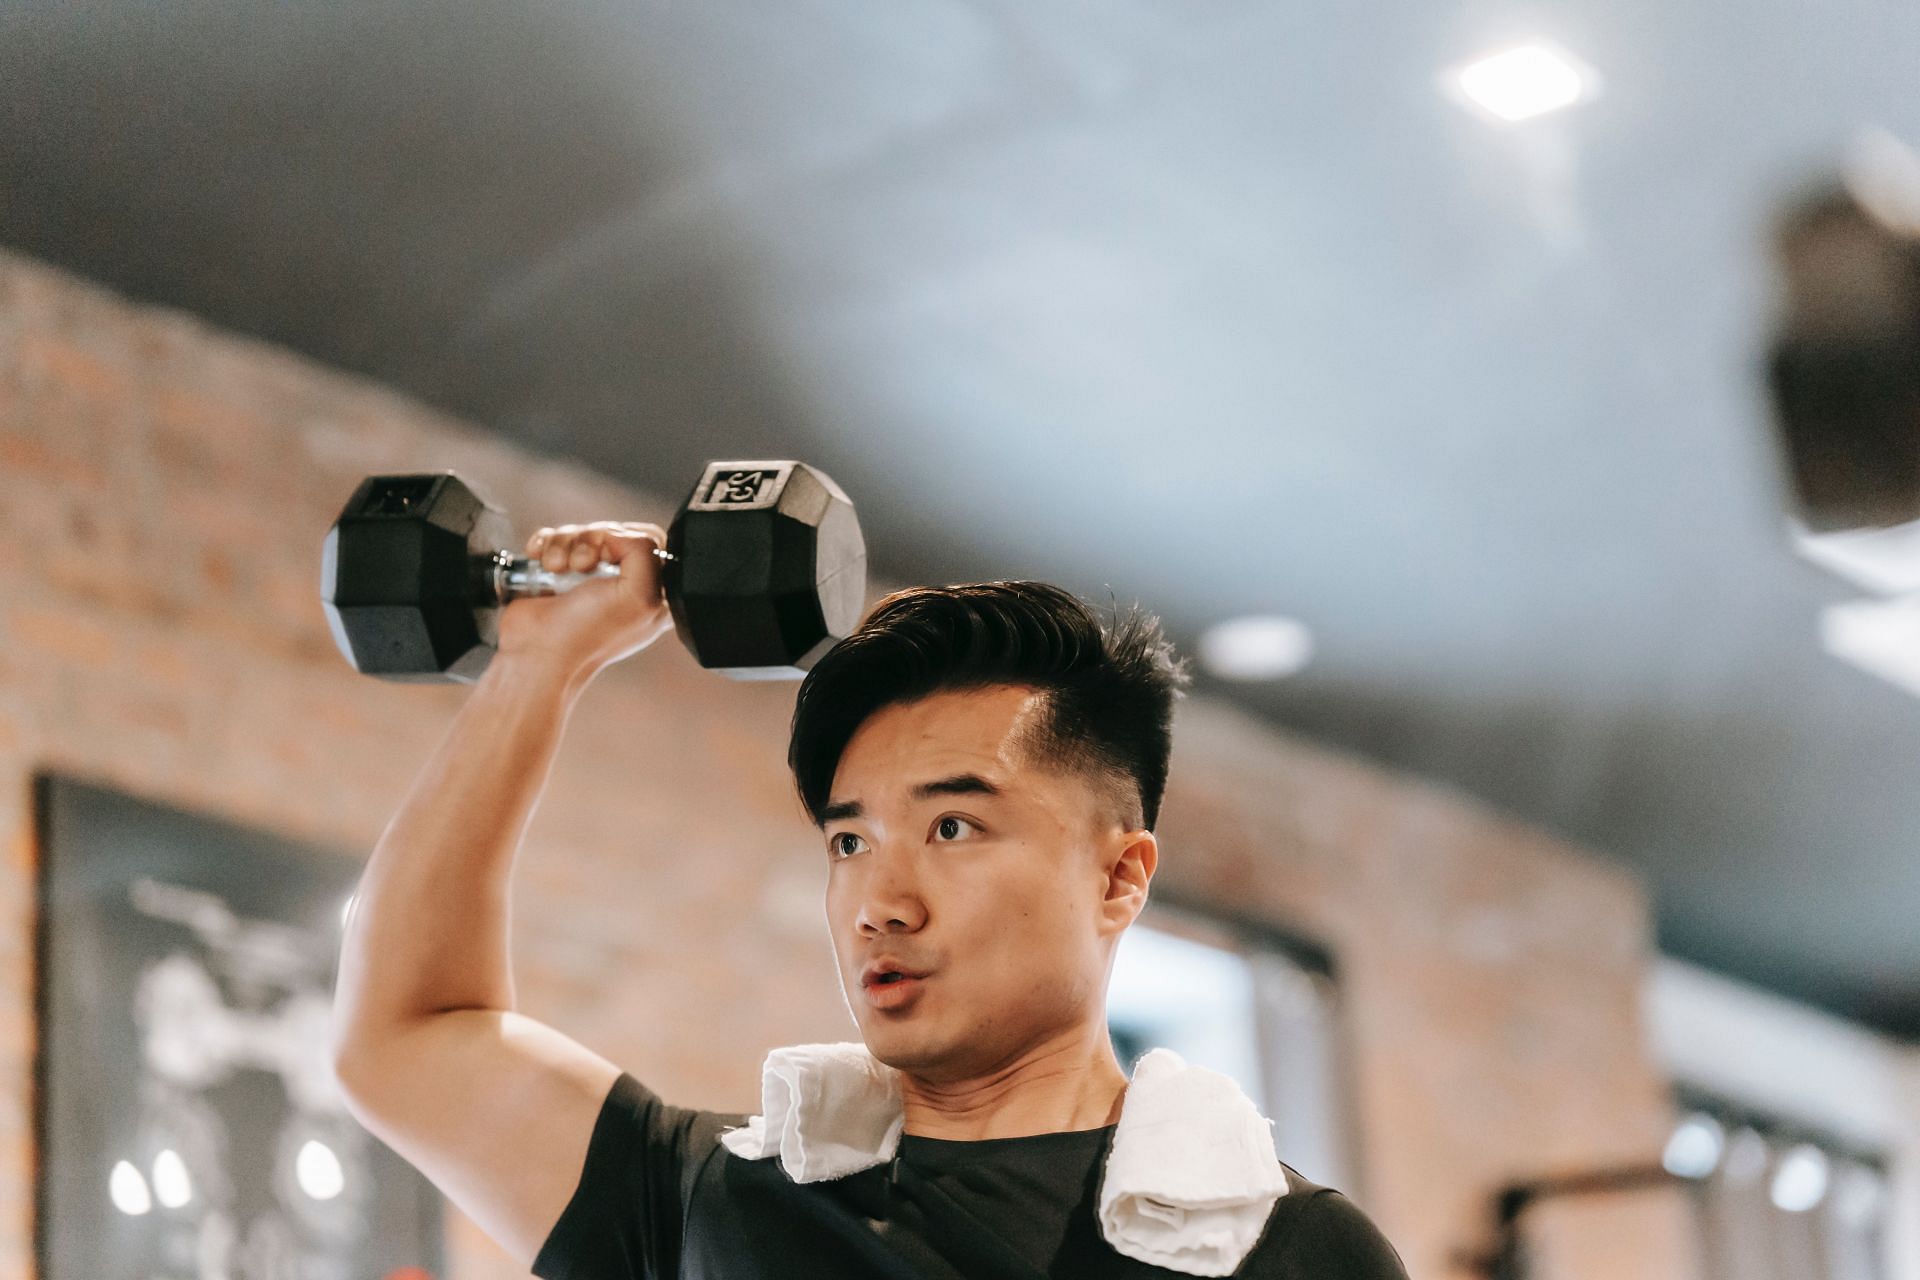 Strong shoulders are important to prevent injuries (Image via Pexels/Andres Ayrton)